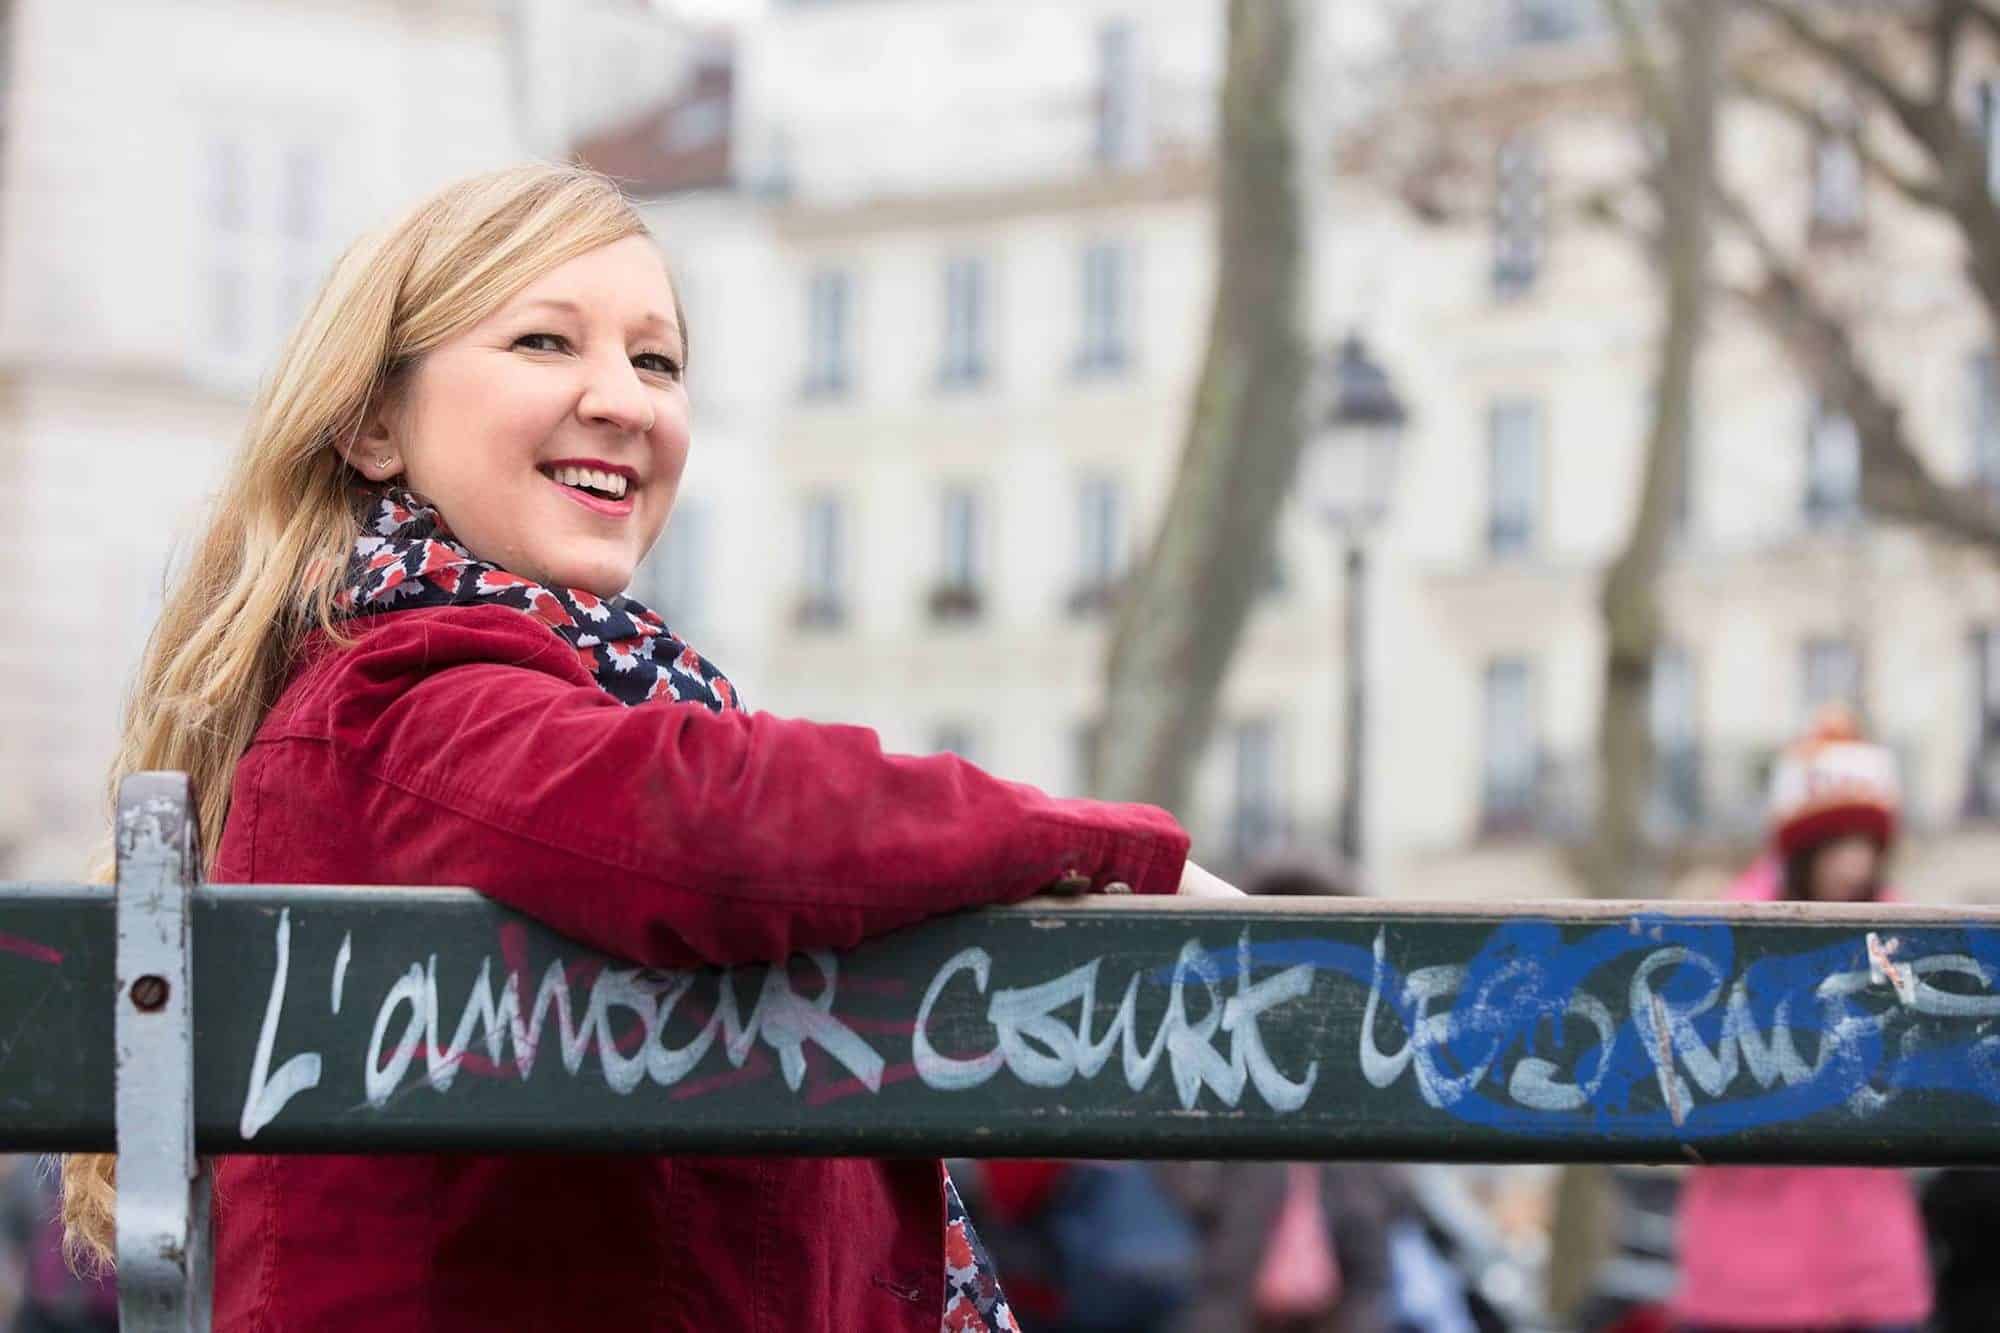 Expat blogger Lily Heise wearing a red jacket, sat on a Paris bench where the often-seen slogan 'Love runs through the streets' painted on it. She is smiling at the camera.